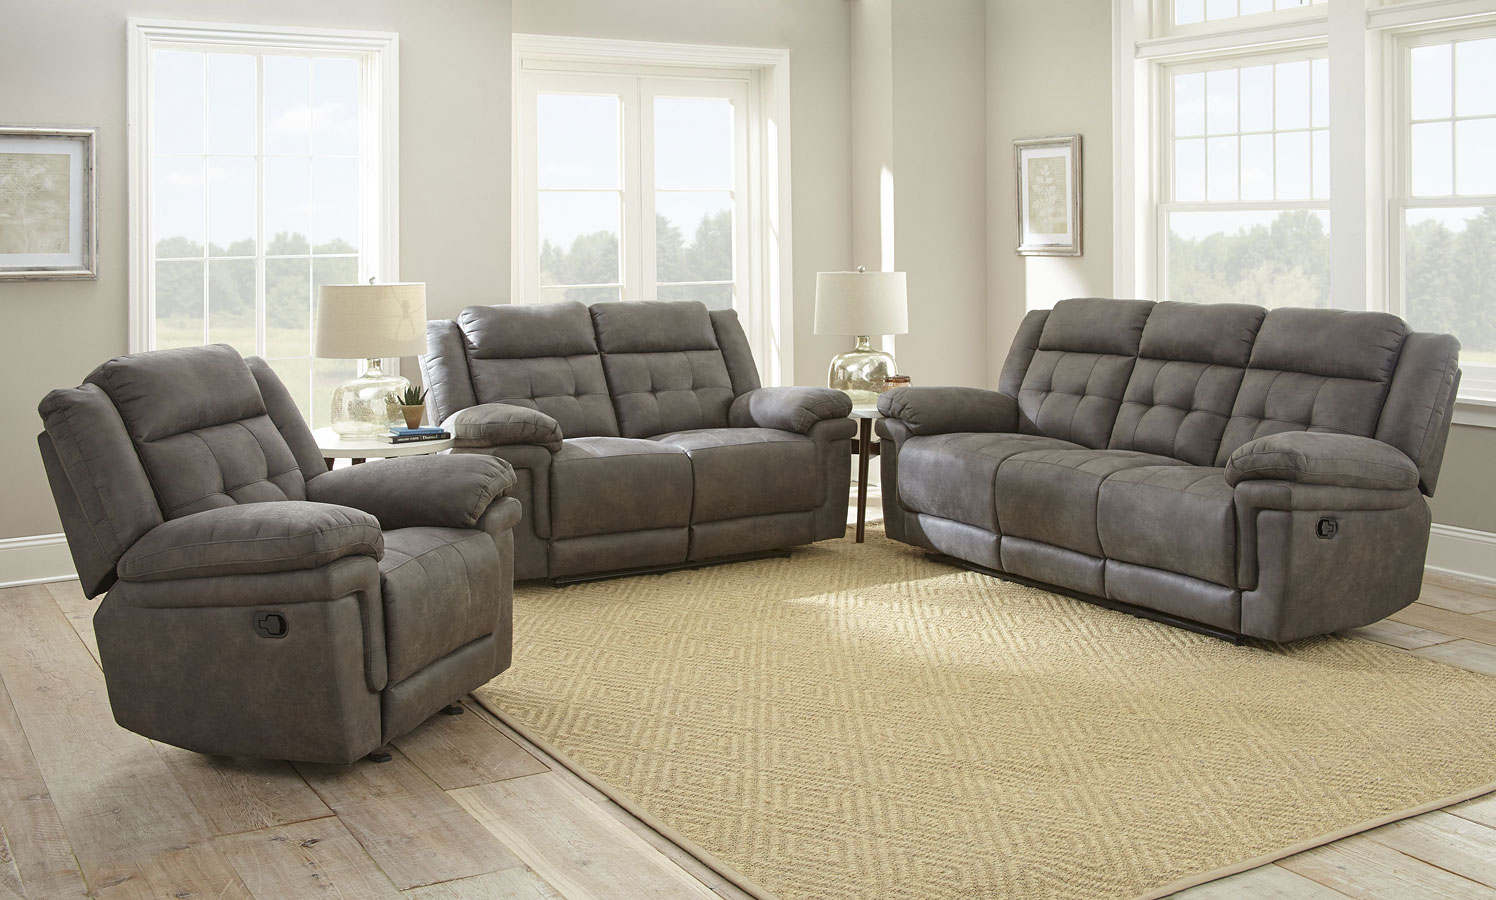 Reclining Living Room Sets With Cup Holders